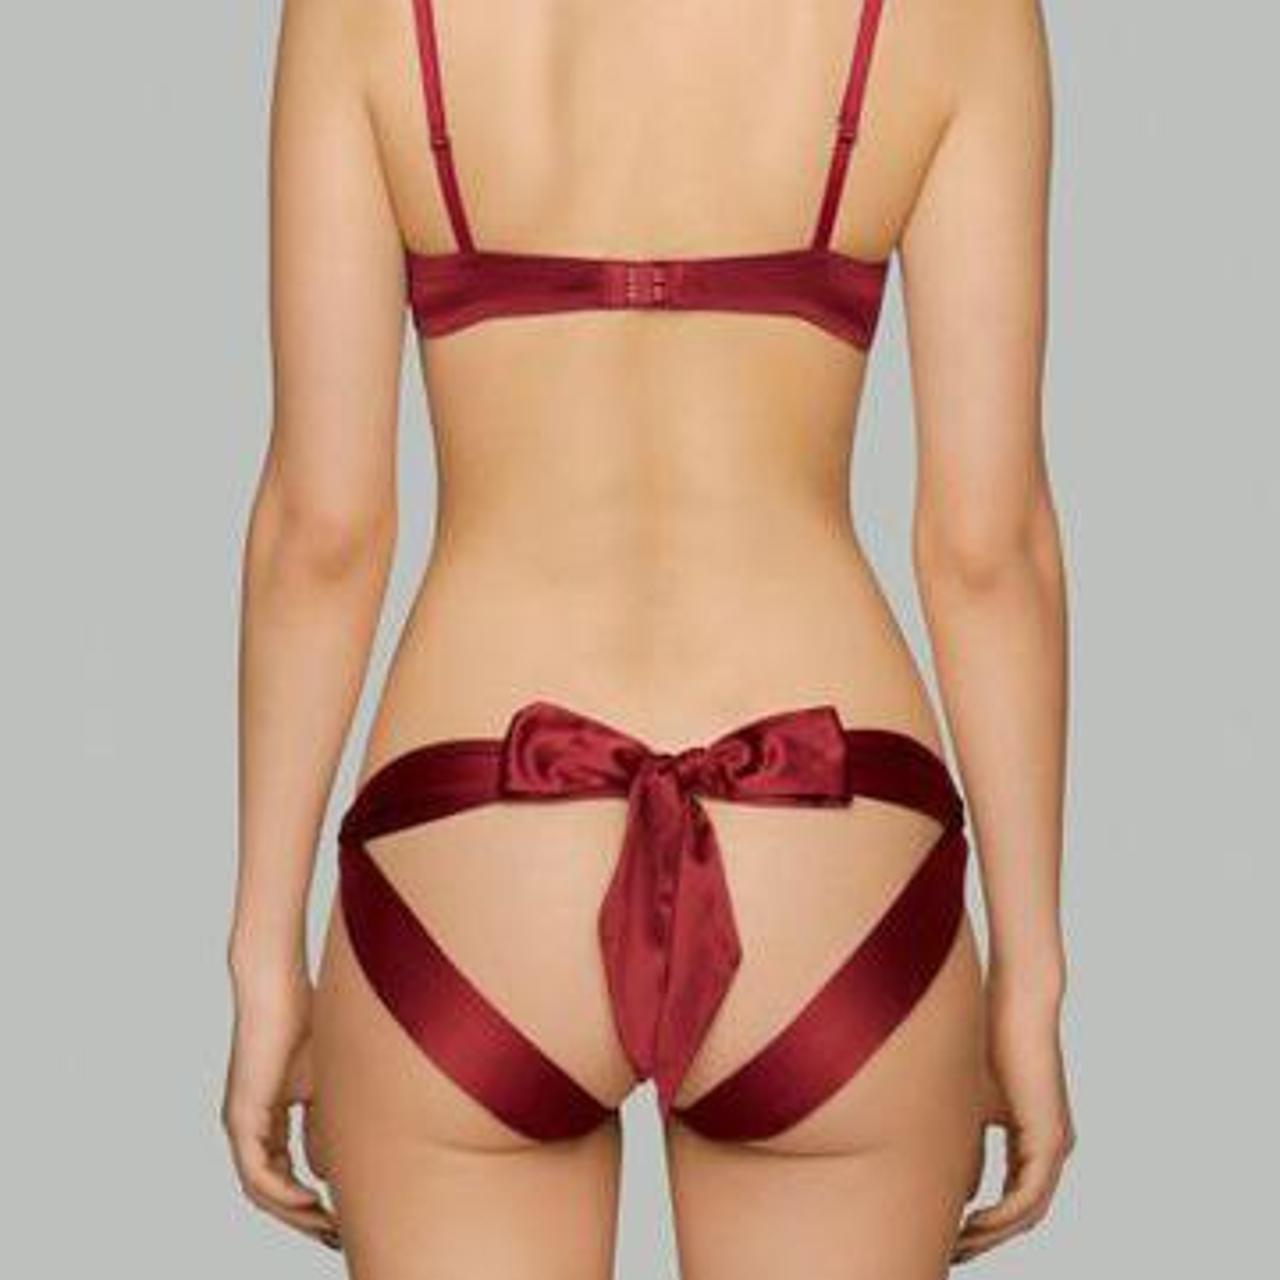 Agent Provocateur Women's Burgundy and Red Nightwear (3)